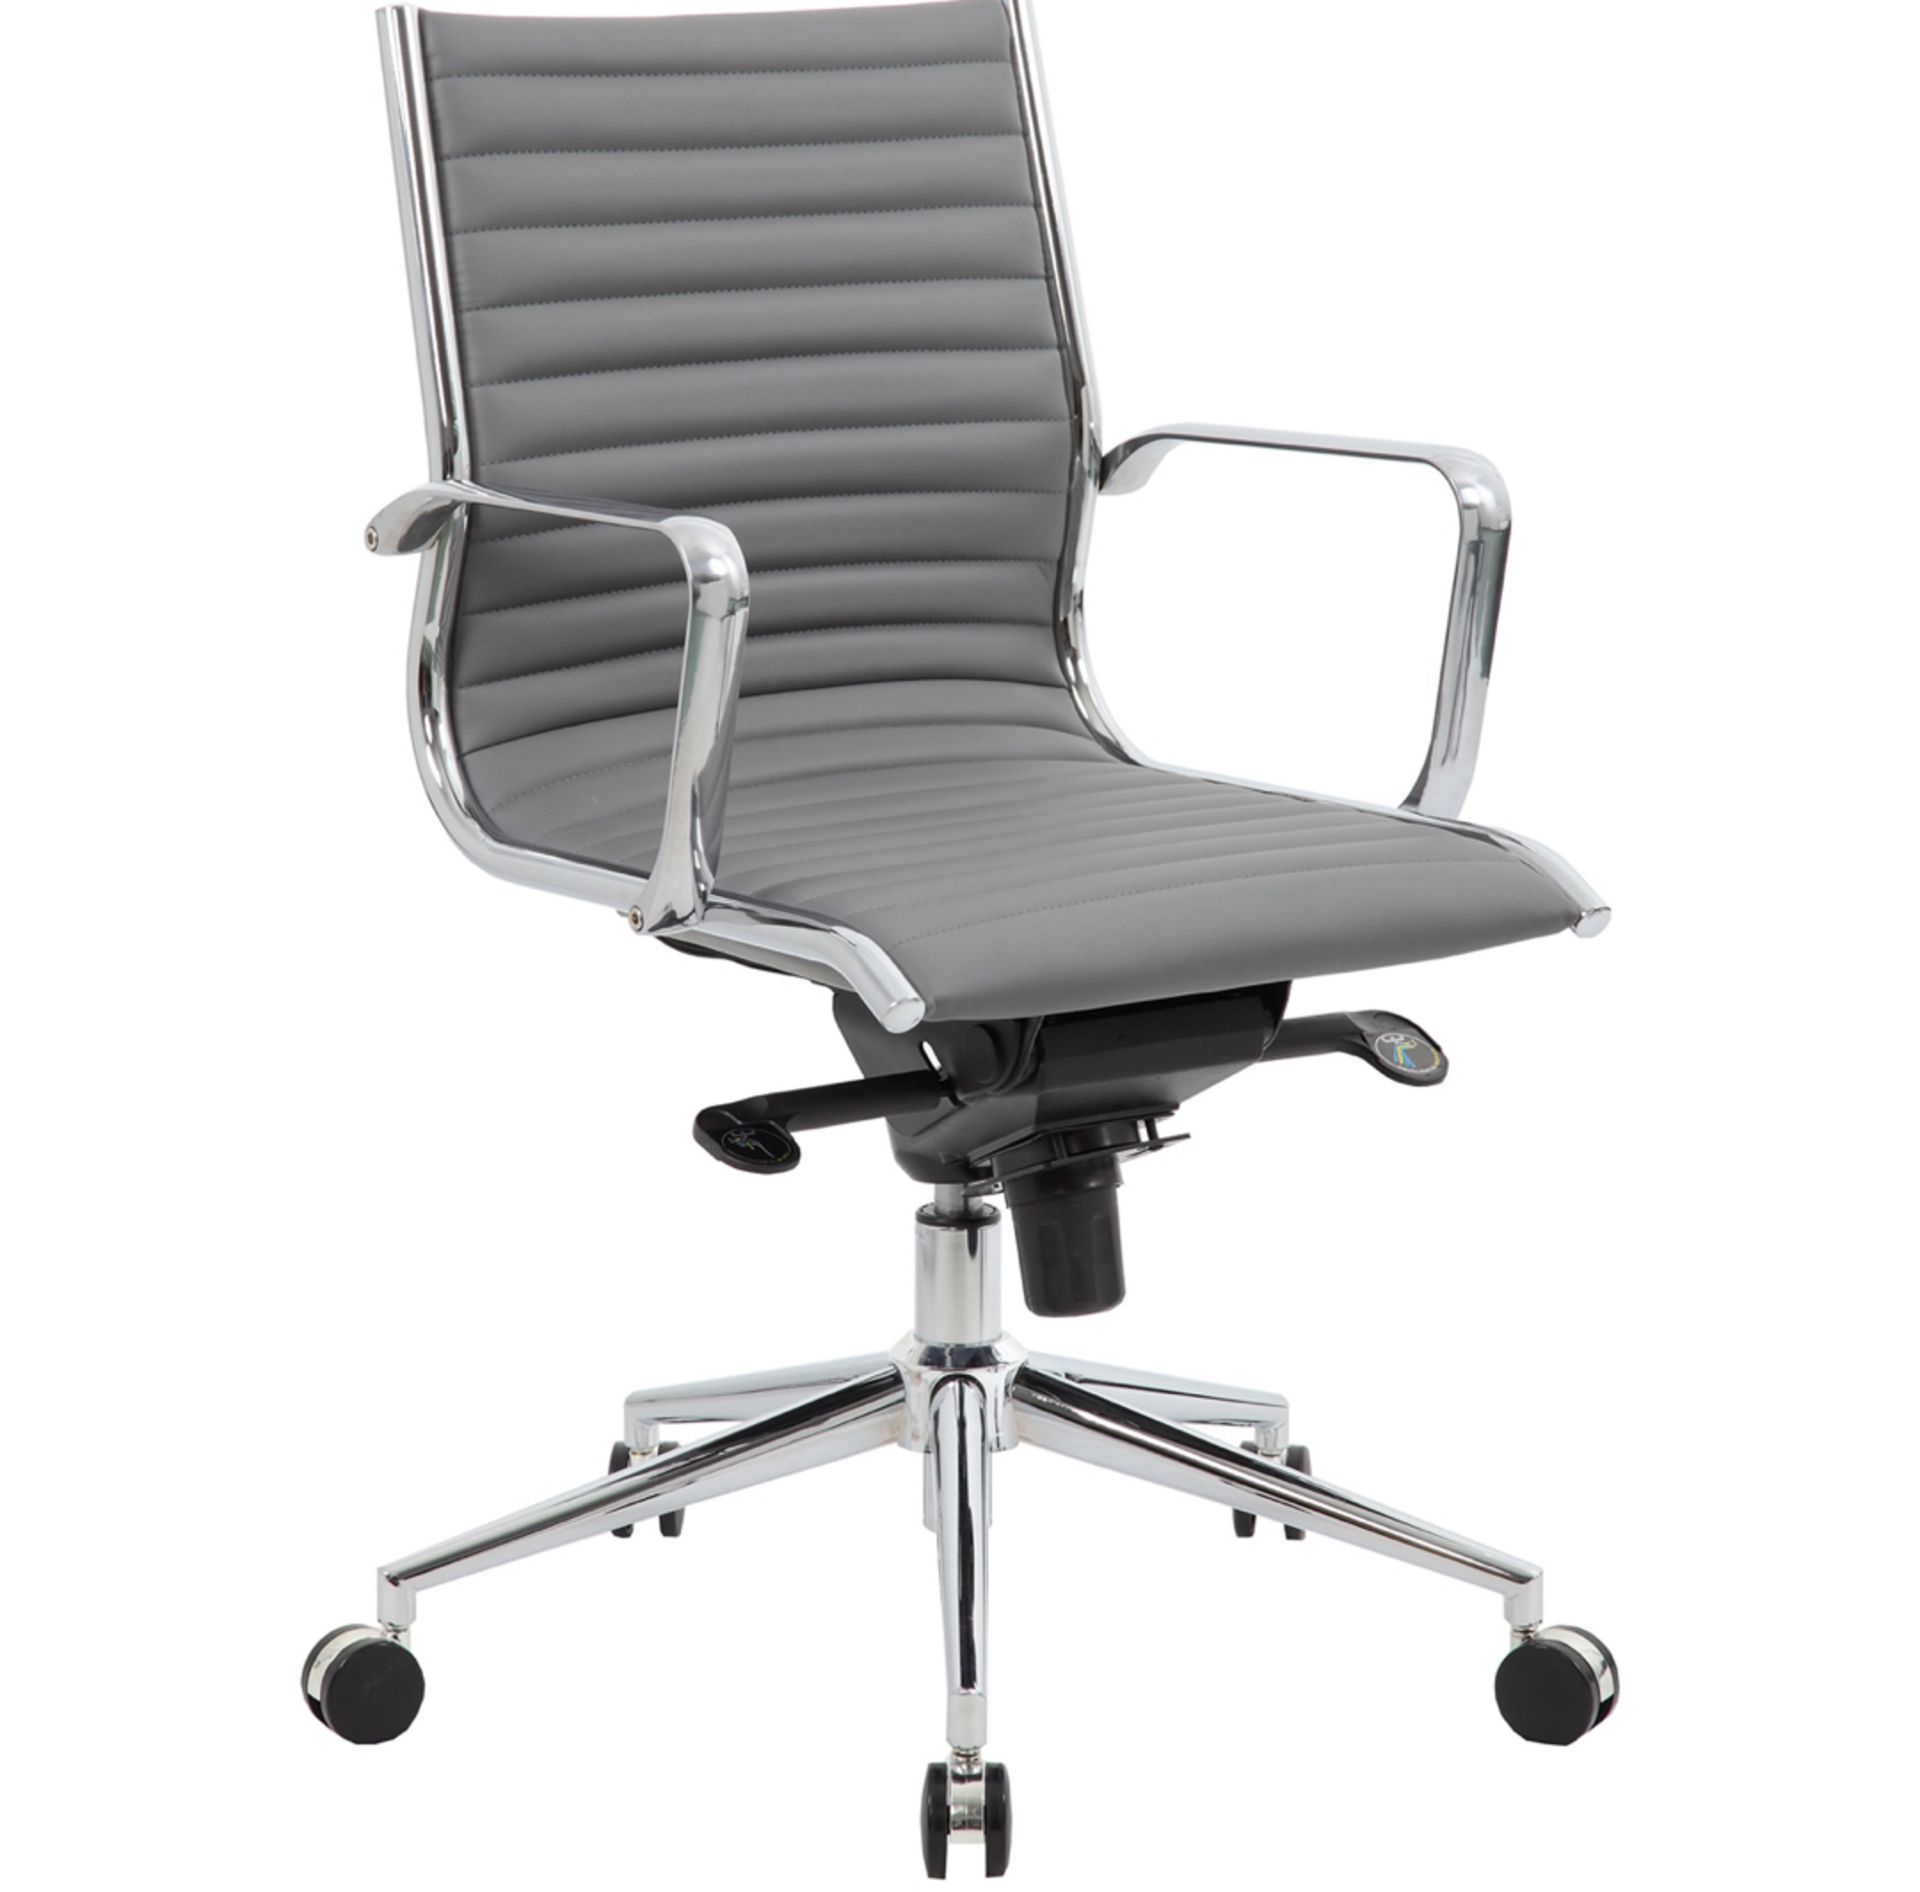 Abbey Medium Back Leather Office Chair - Perfect Condition - https://www.officefurnitureonline.co.uk